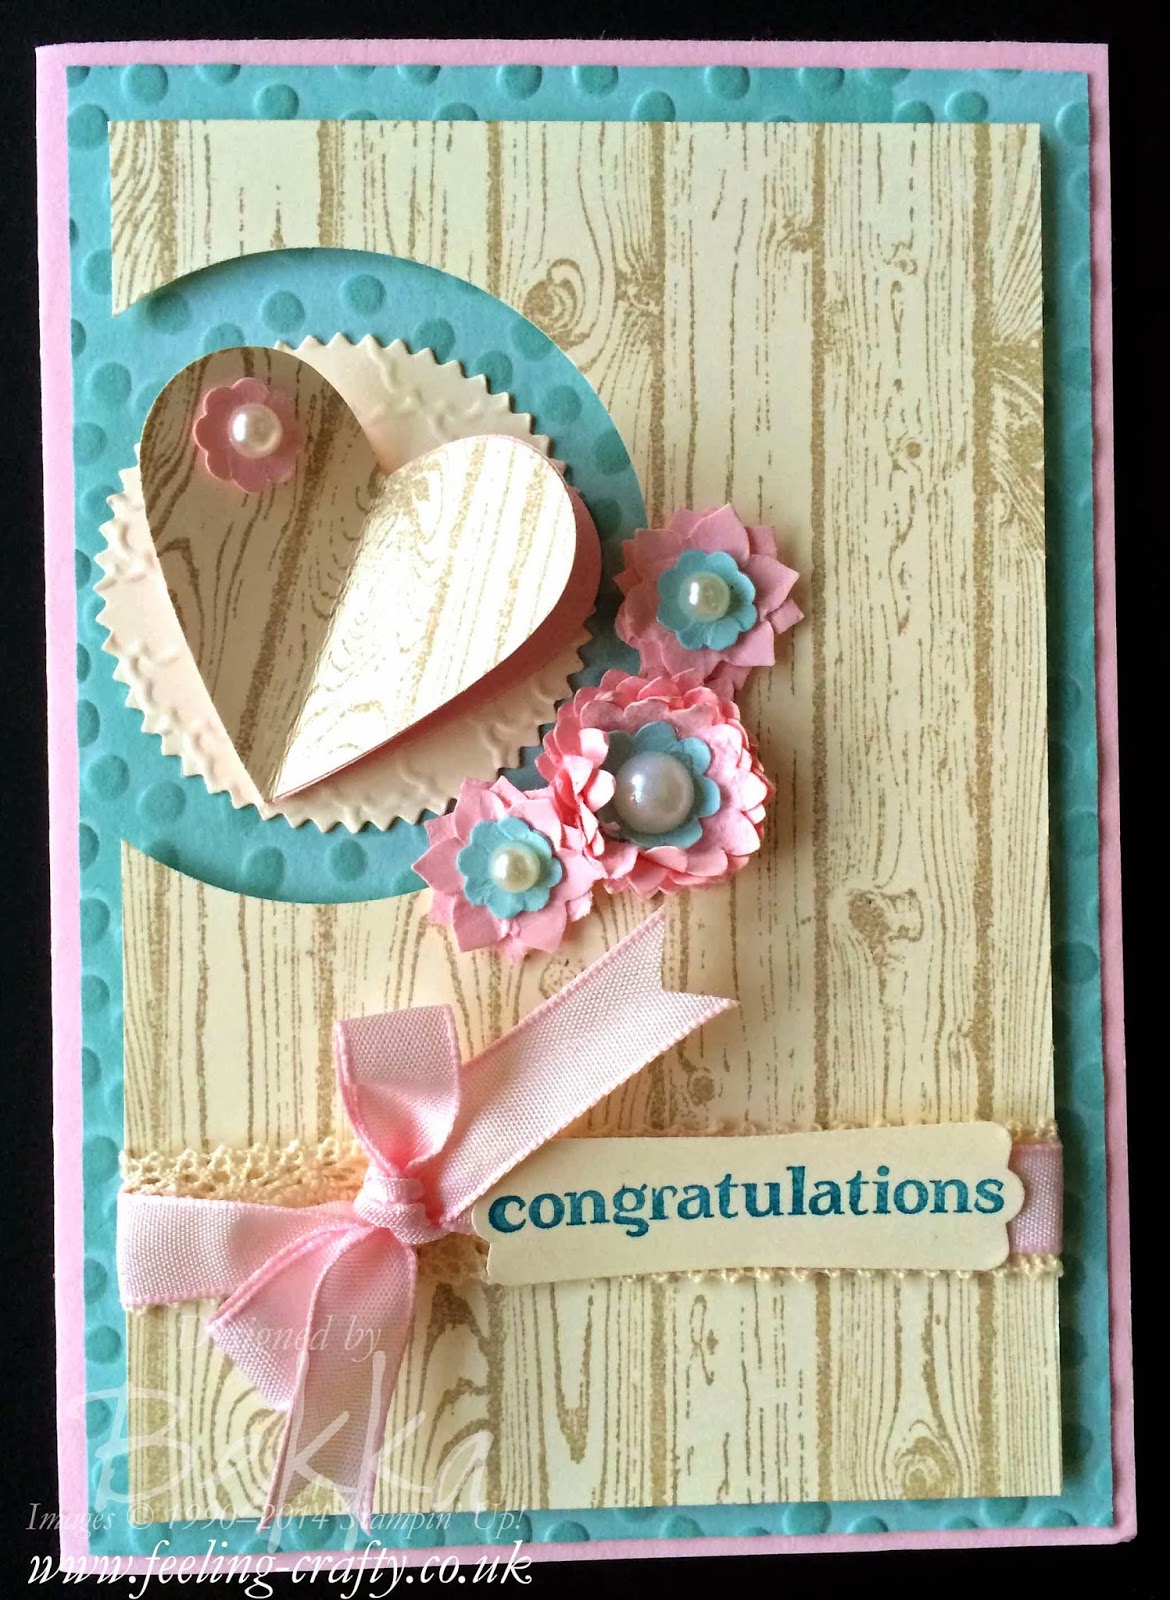 Engagement Congratulations Card made with Stampin' Up! Supplies - find out more here